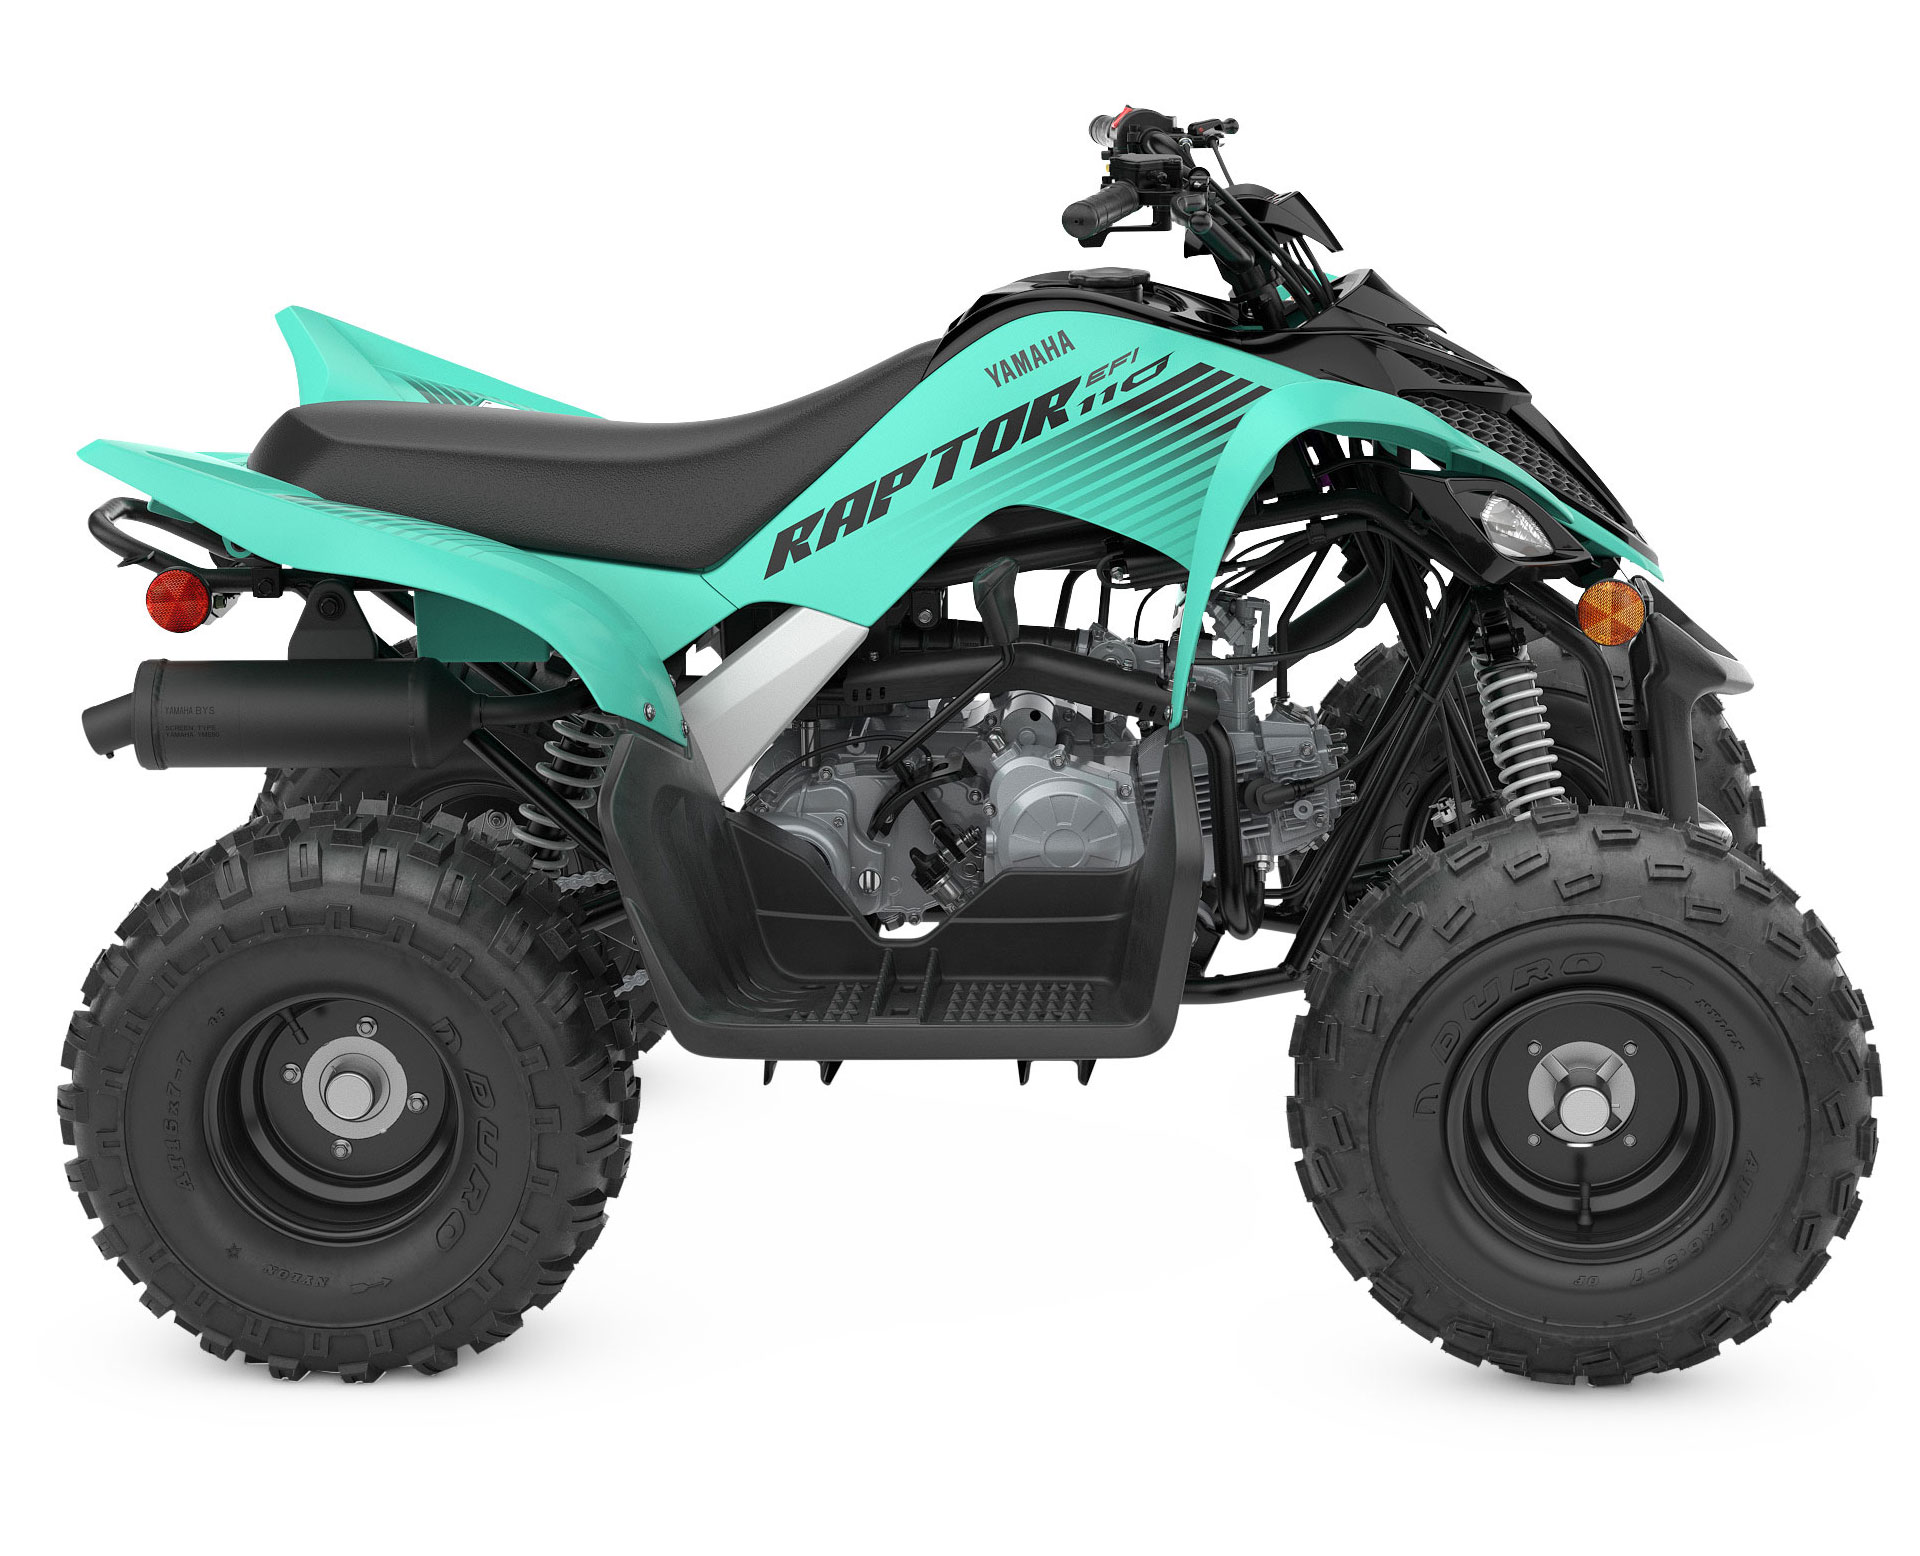 Thumbnail of your customized 2024 Raptor 110